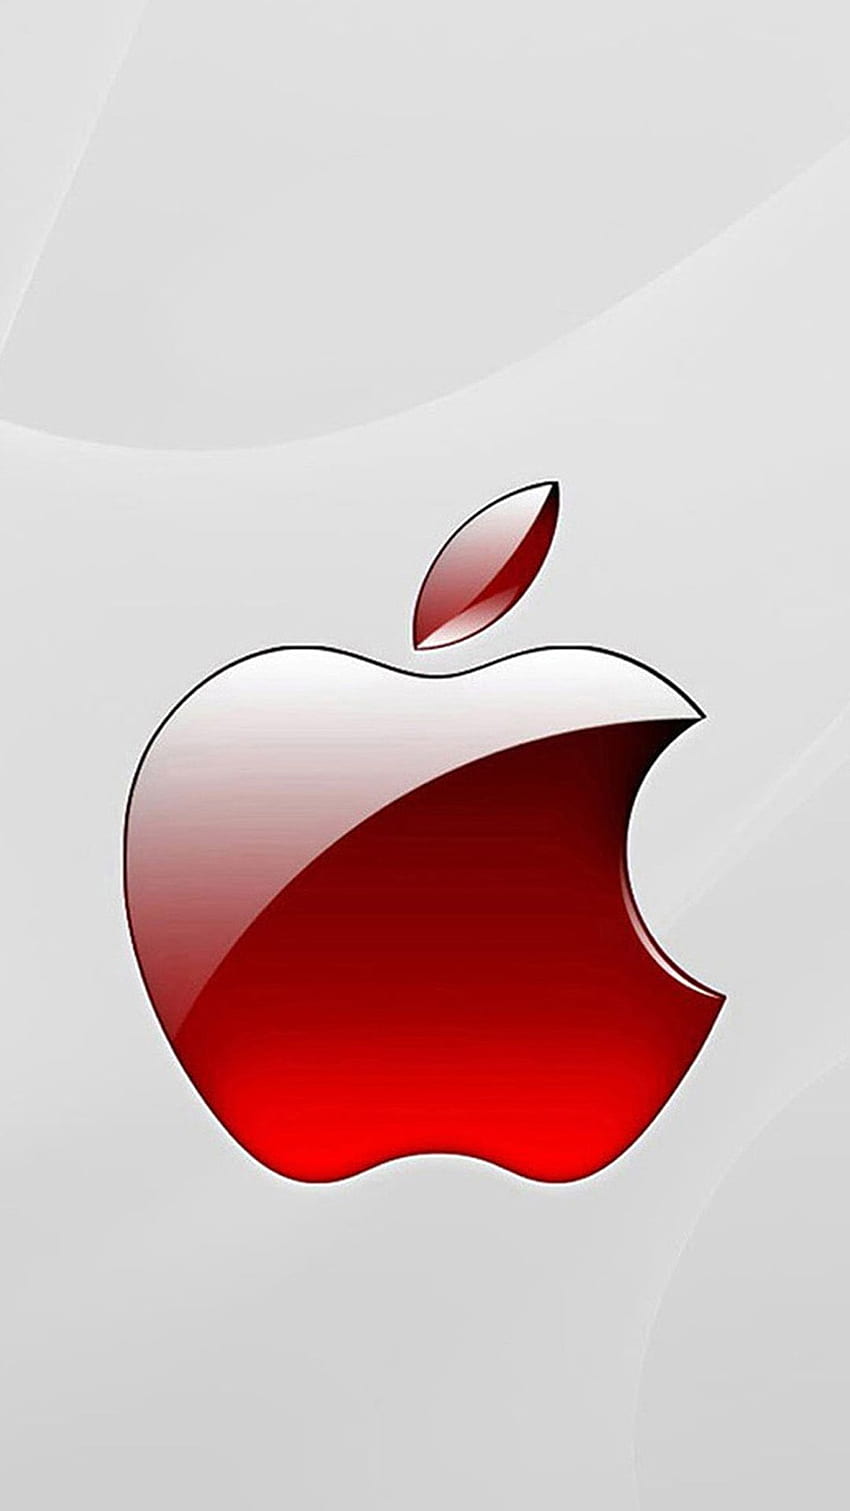 Red Apple LOGO 01 iPhone 6 and 6 plus HD phone wallpaper